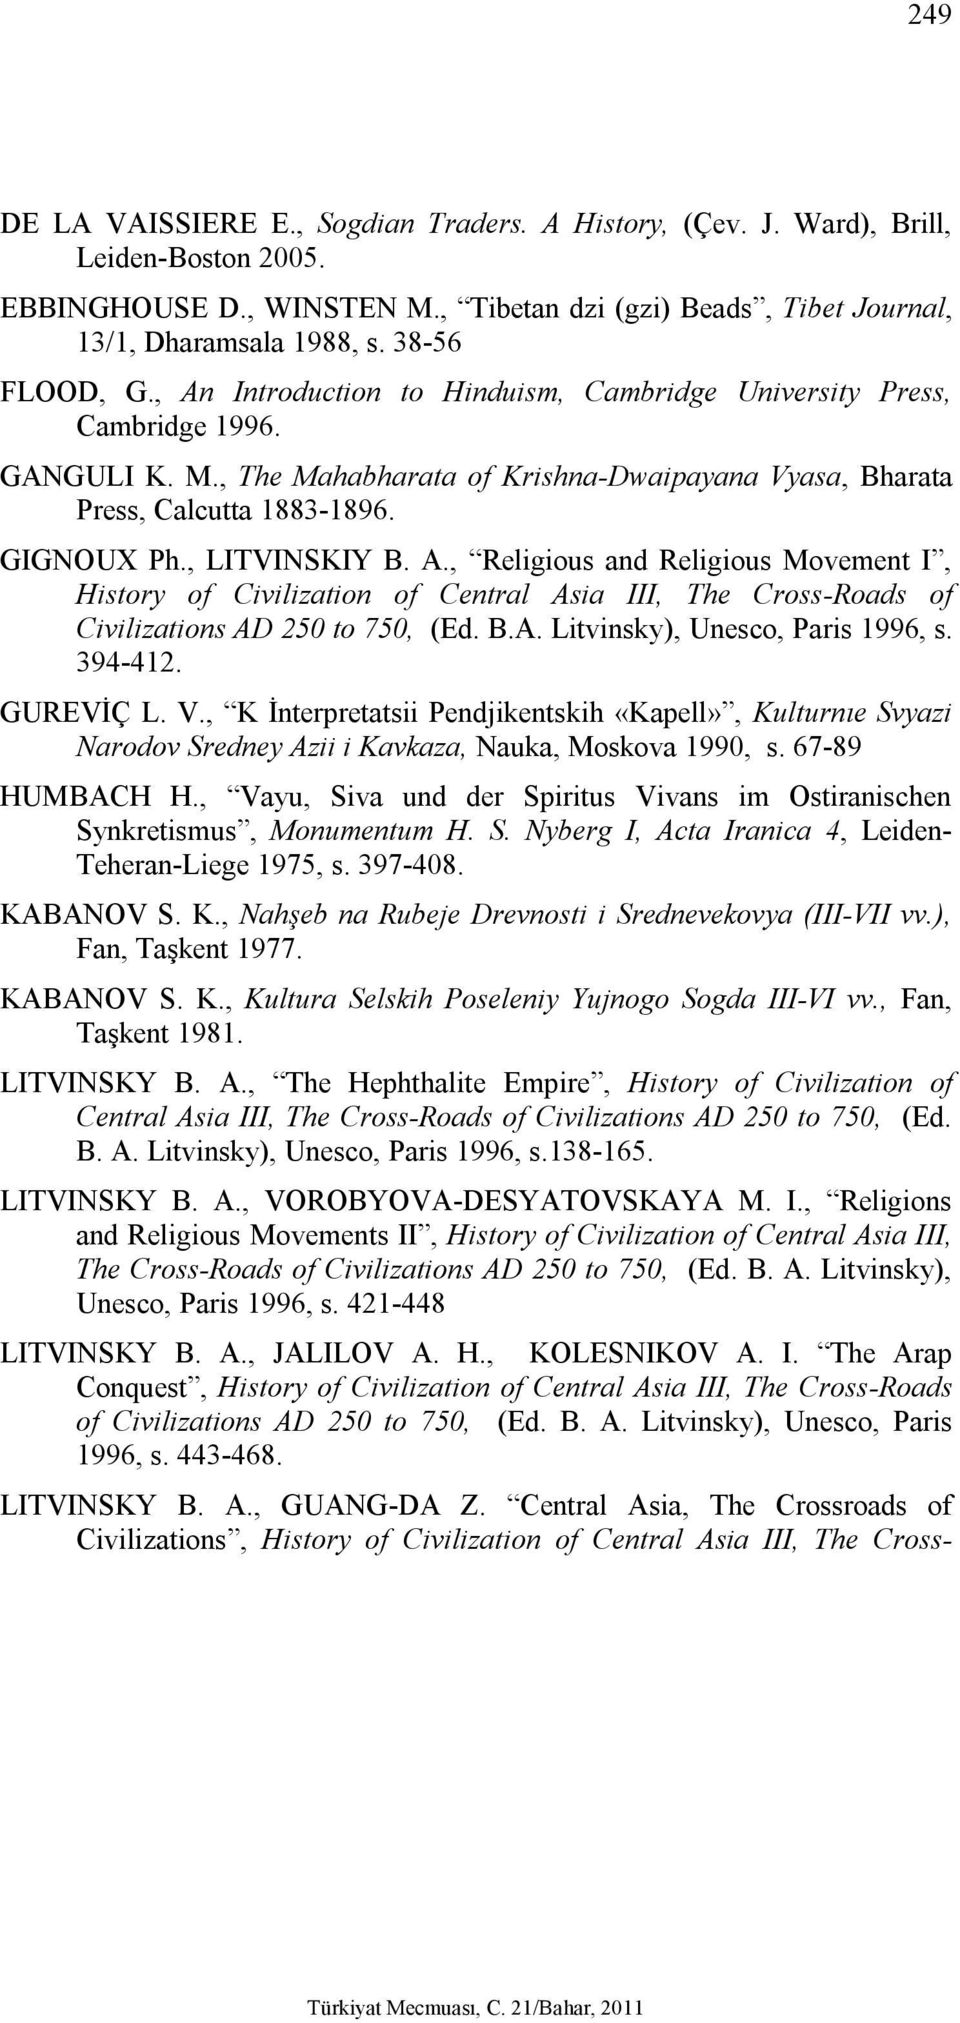 , LITVINSKIY B. A., Religious and Religious Movement I, History of Civilization of Central Asia III, The Cross-Roads of Civilizations AD 250 to 750, (Ed. B.A. Litvinsky), Unesco, Paris 1996, s.